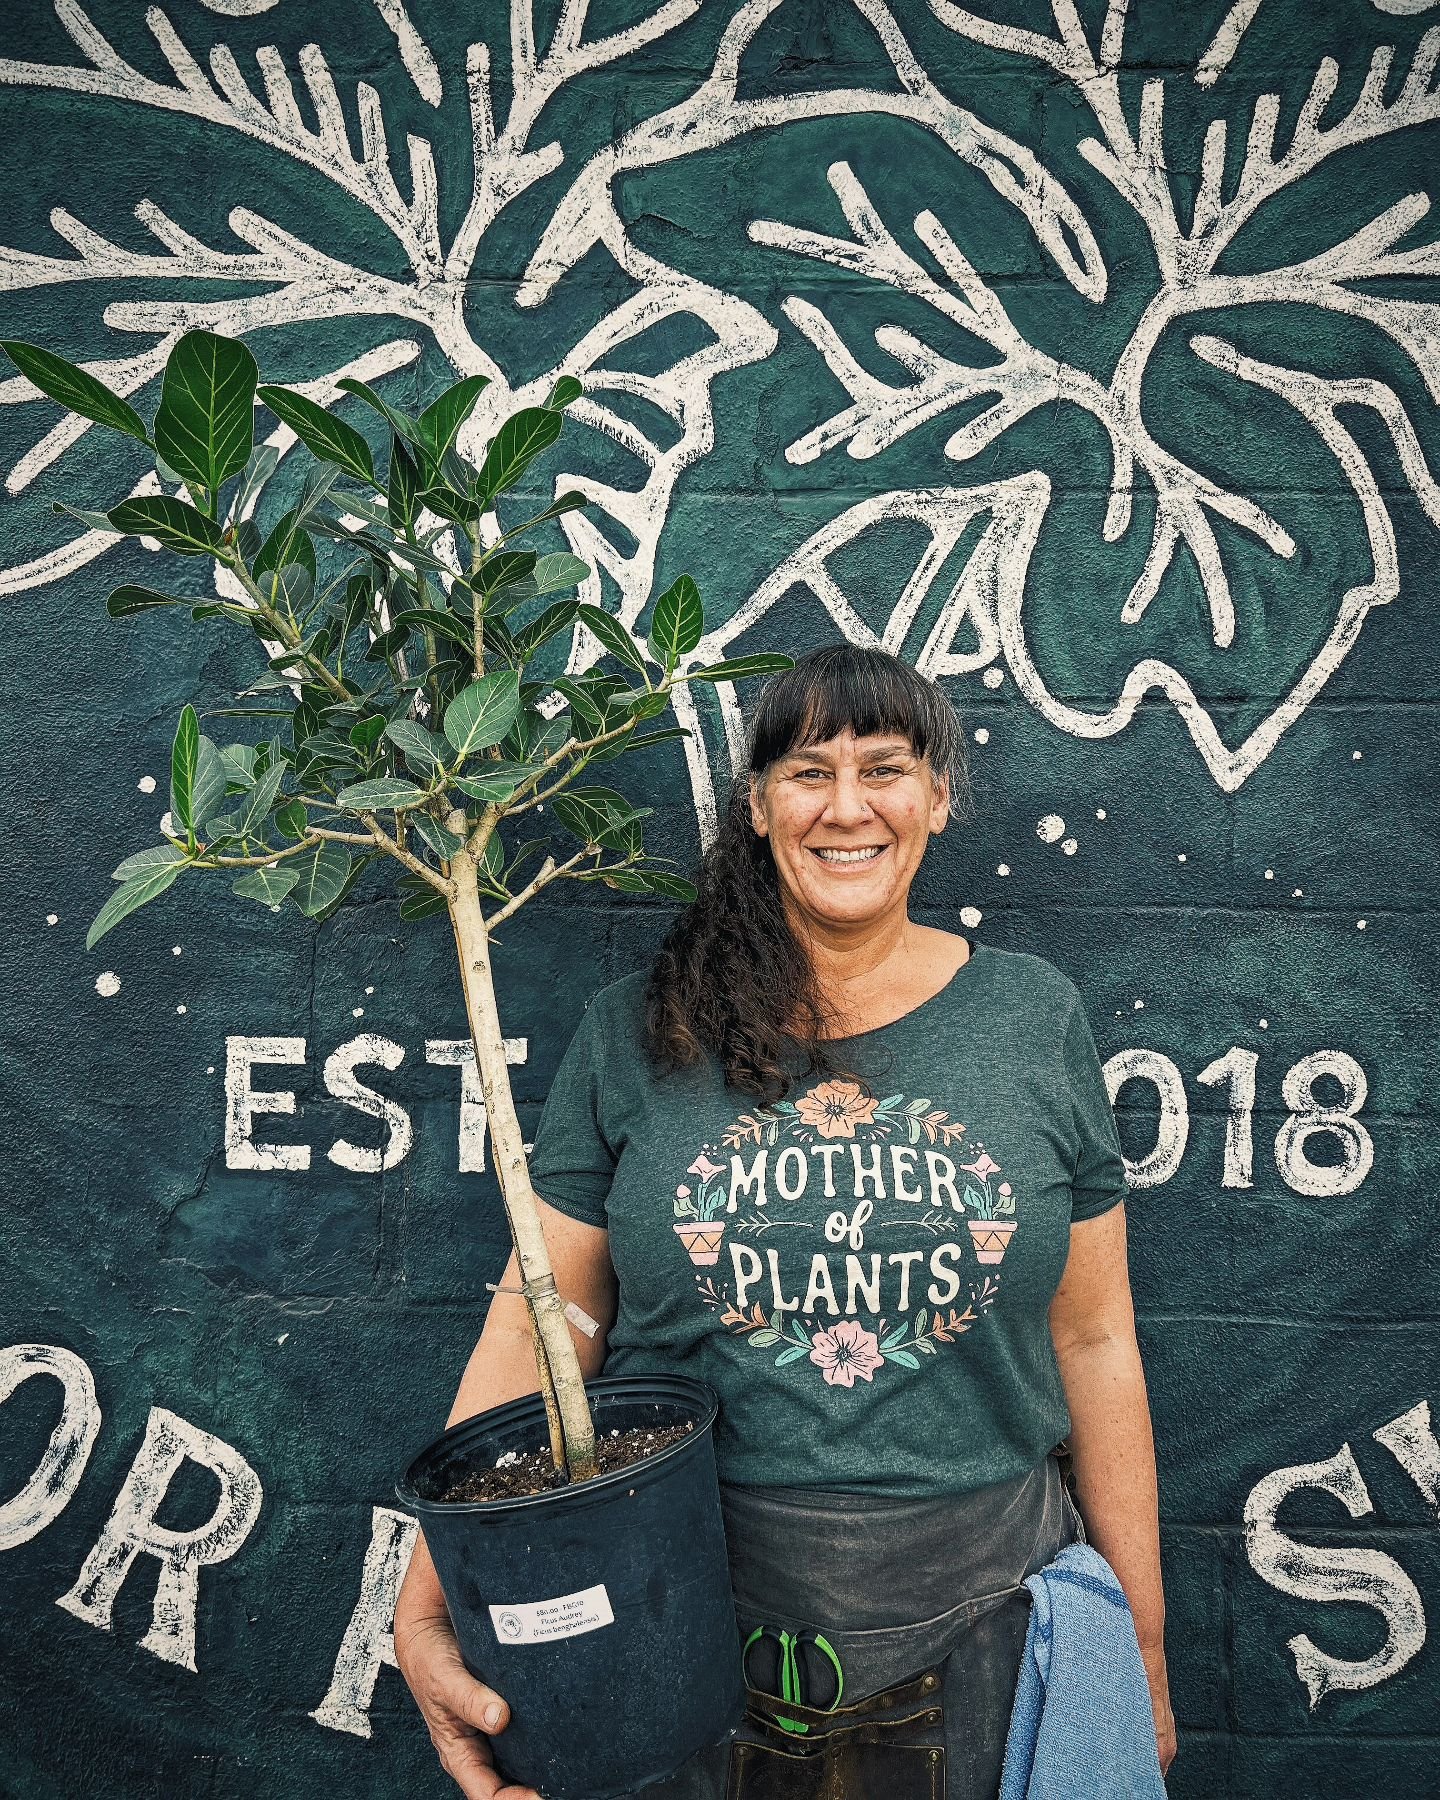 Did you know you could request plants? Should we not have them in store? Do you want a 7 ft ficus tree? We got ya. Just ask any of our employees, and we will get your info and try our best to find what you're looking for. 🤘💚